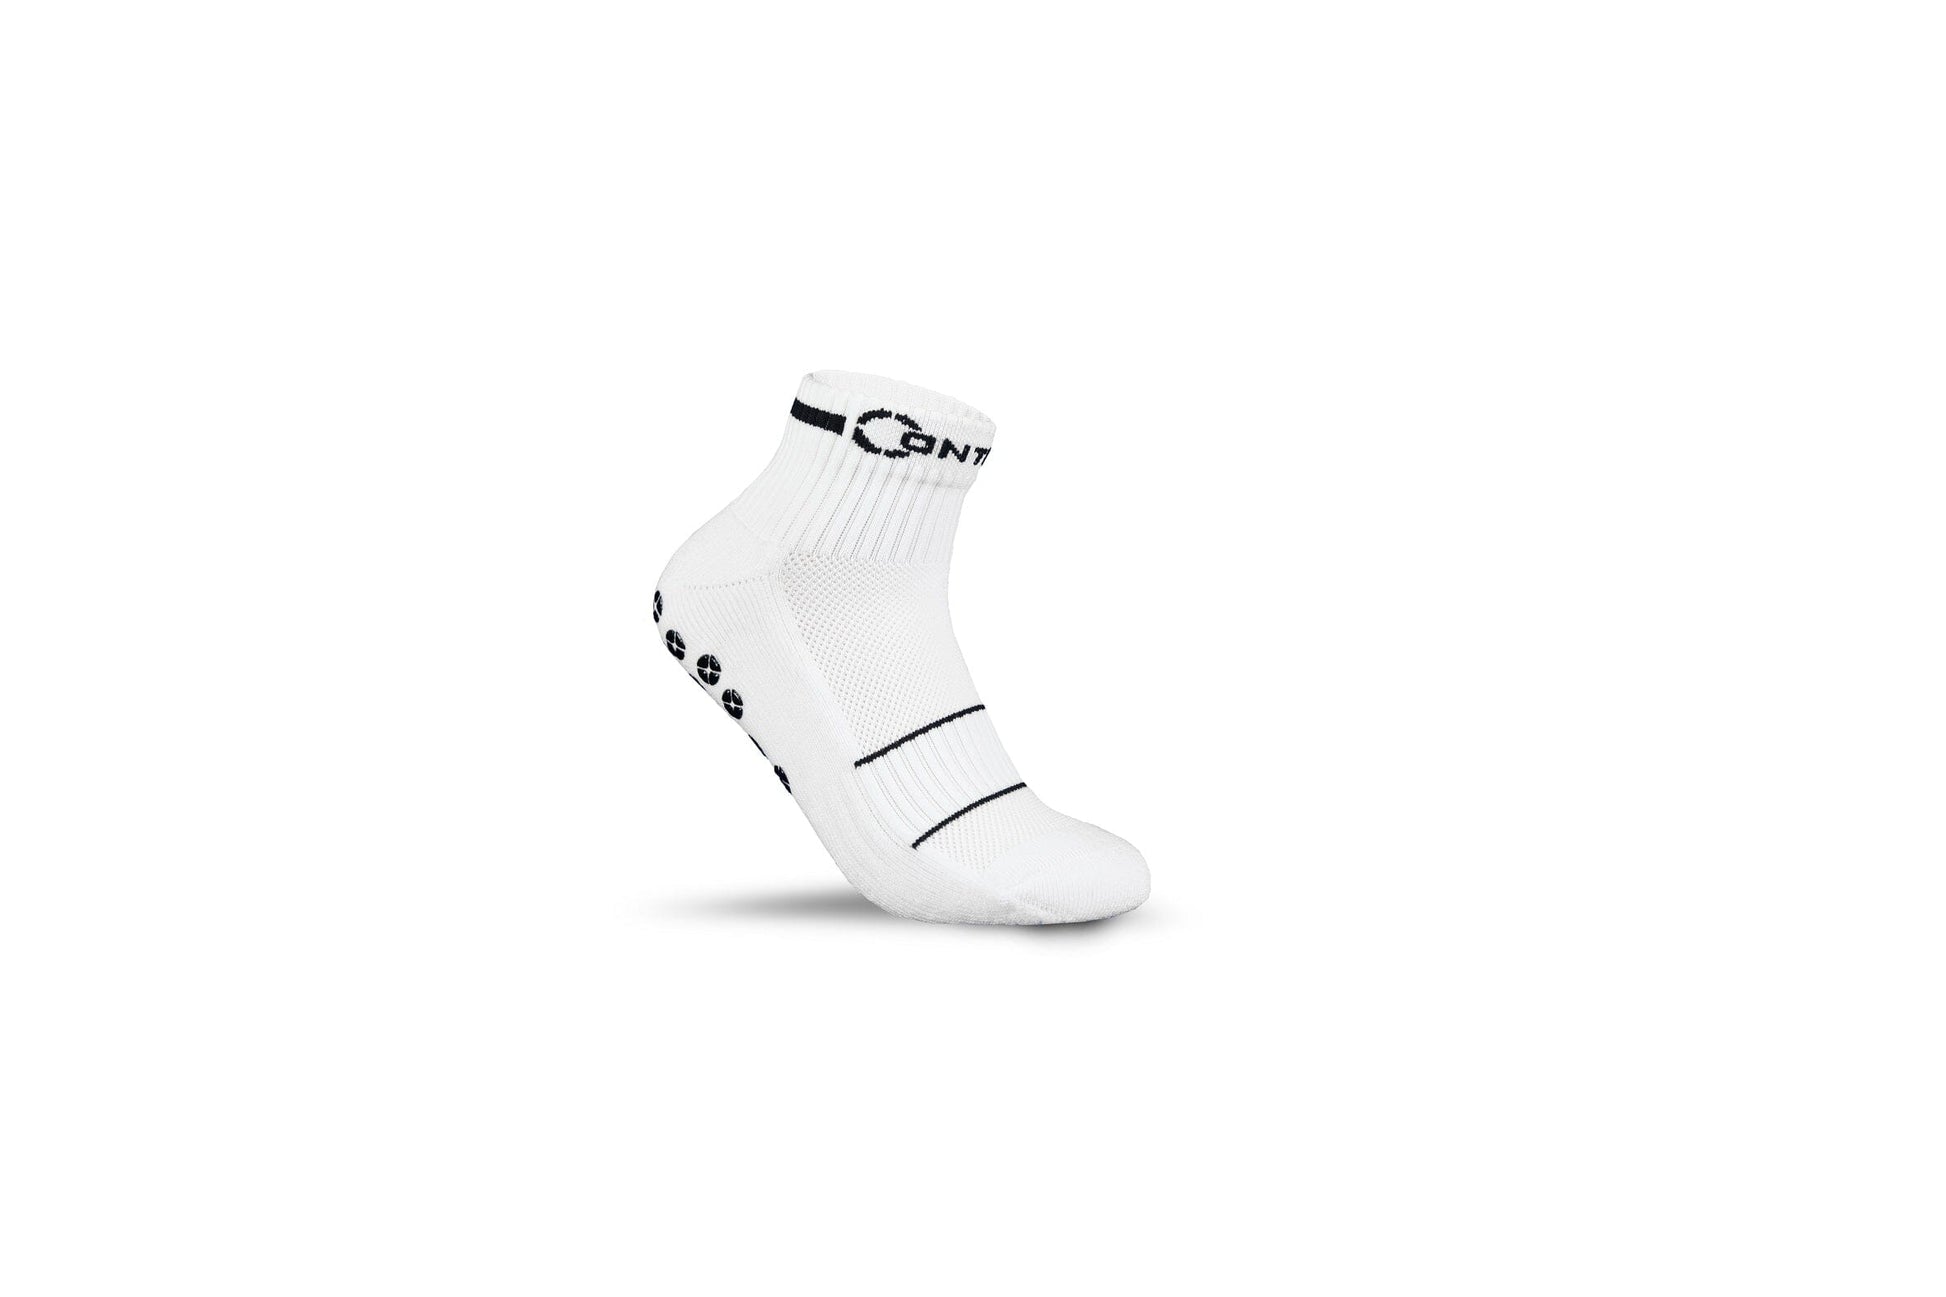  Small SoxPRO navy grip socks size small (5-8.5) : Clothing,  Shoes & Jewelry